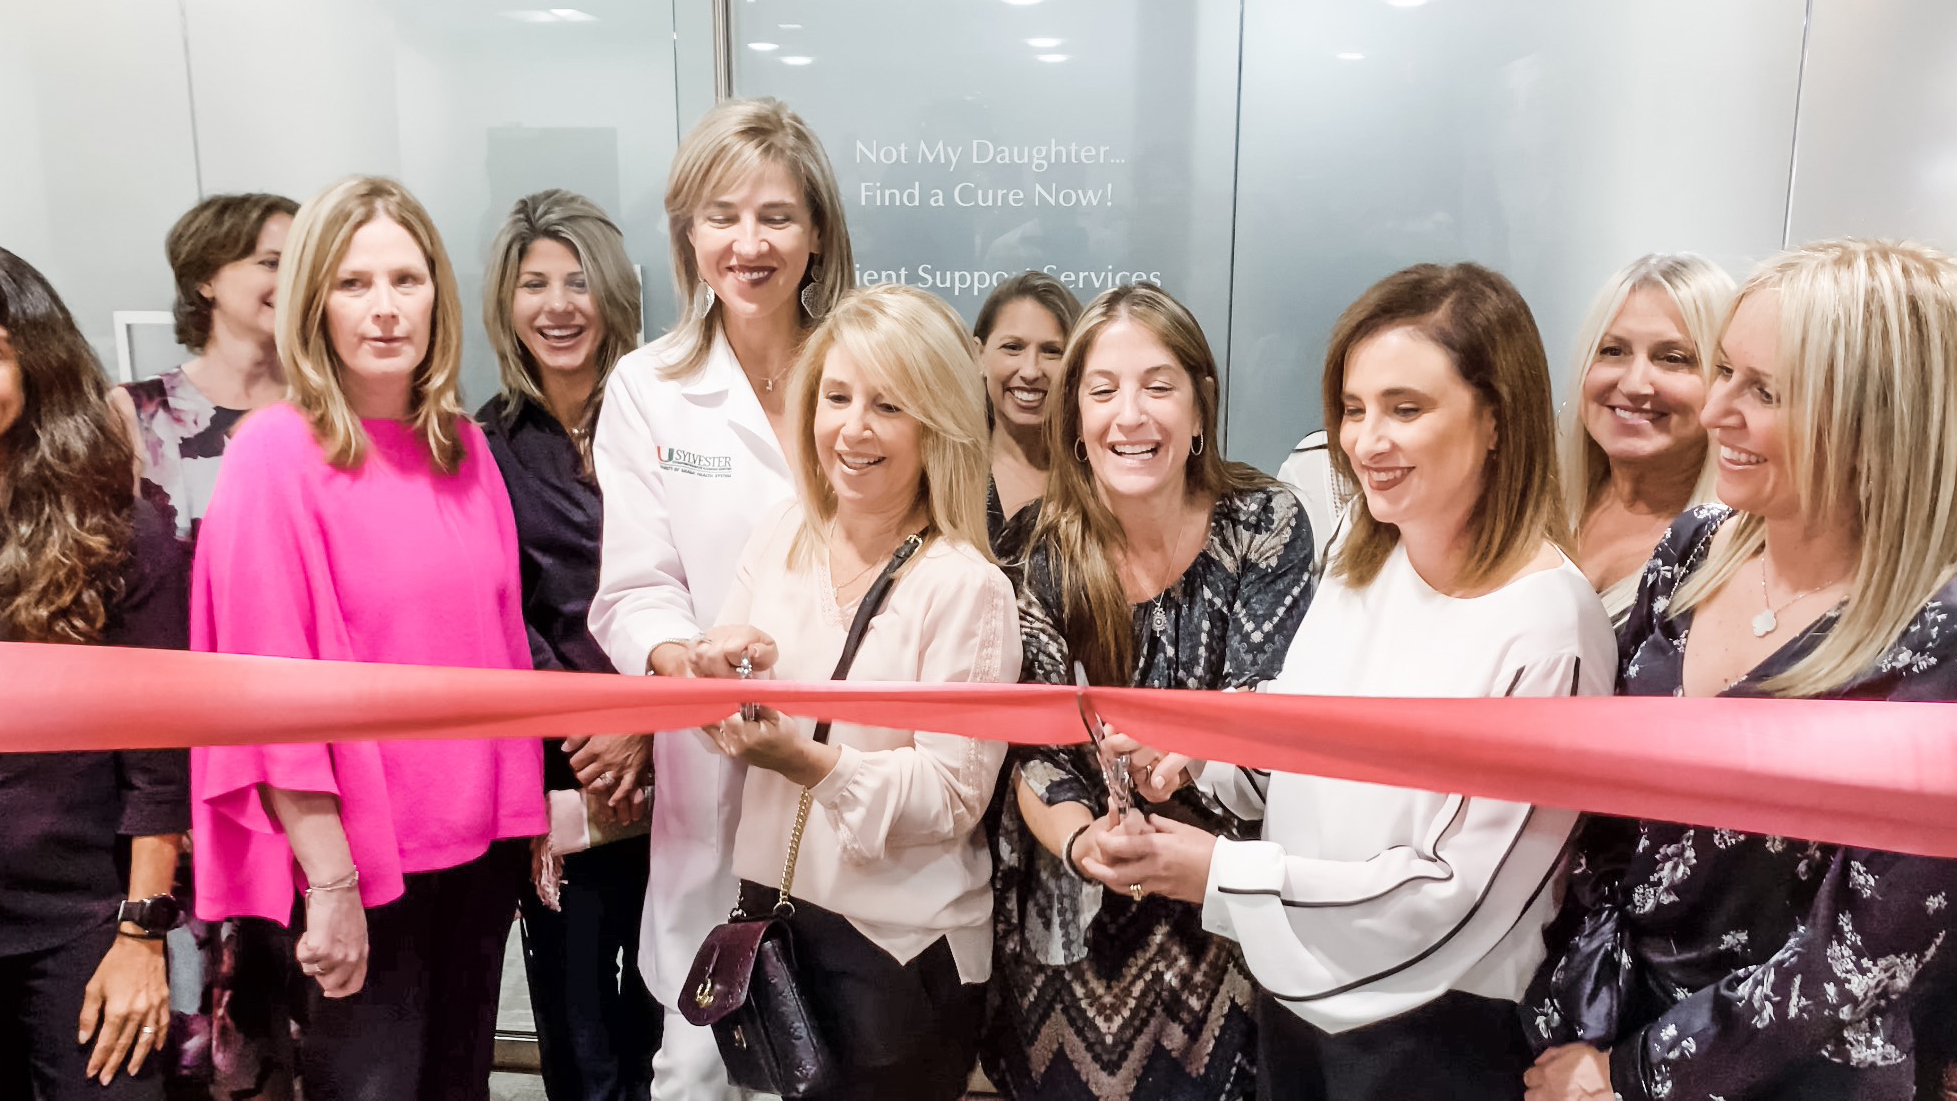 Cancer Patient Support Center Opens Thanks To This Amazing Organization 3